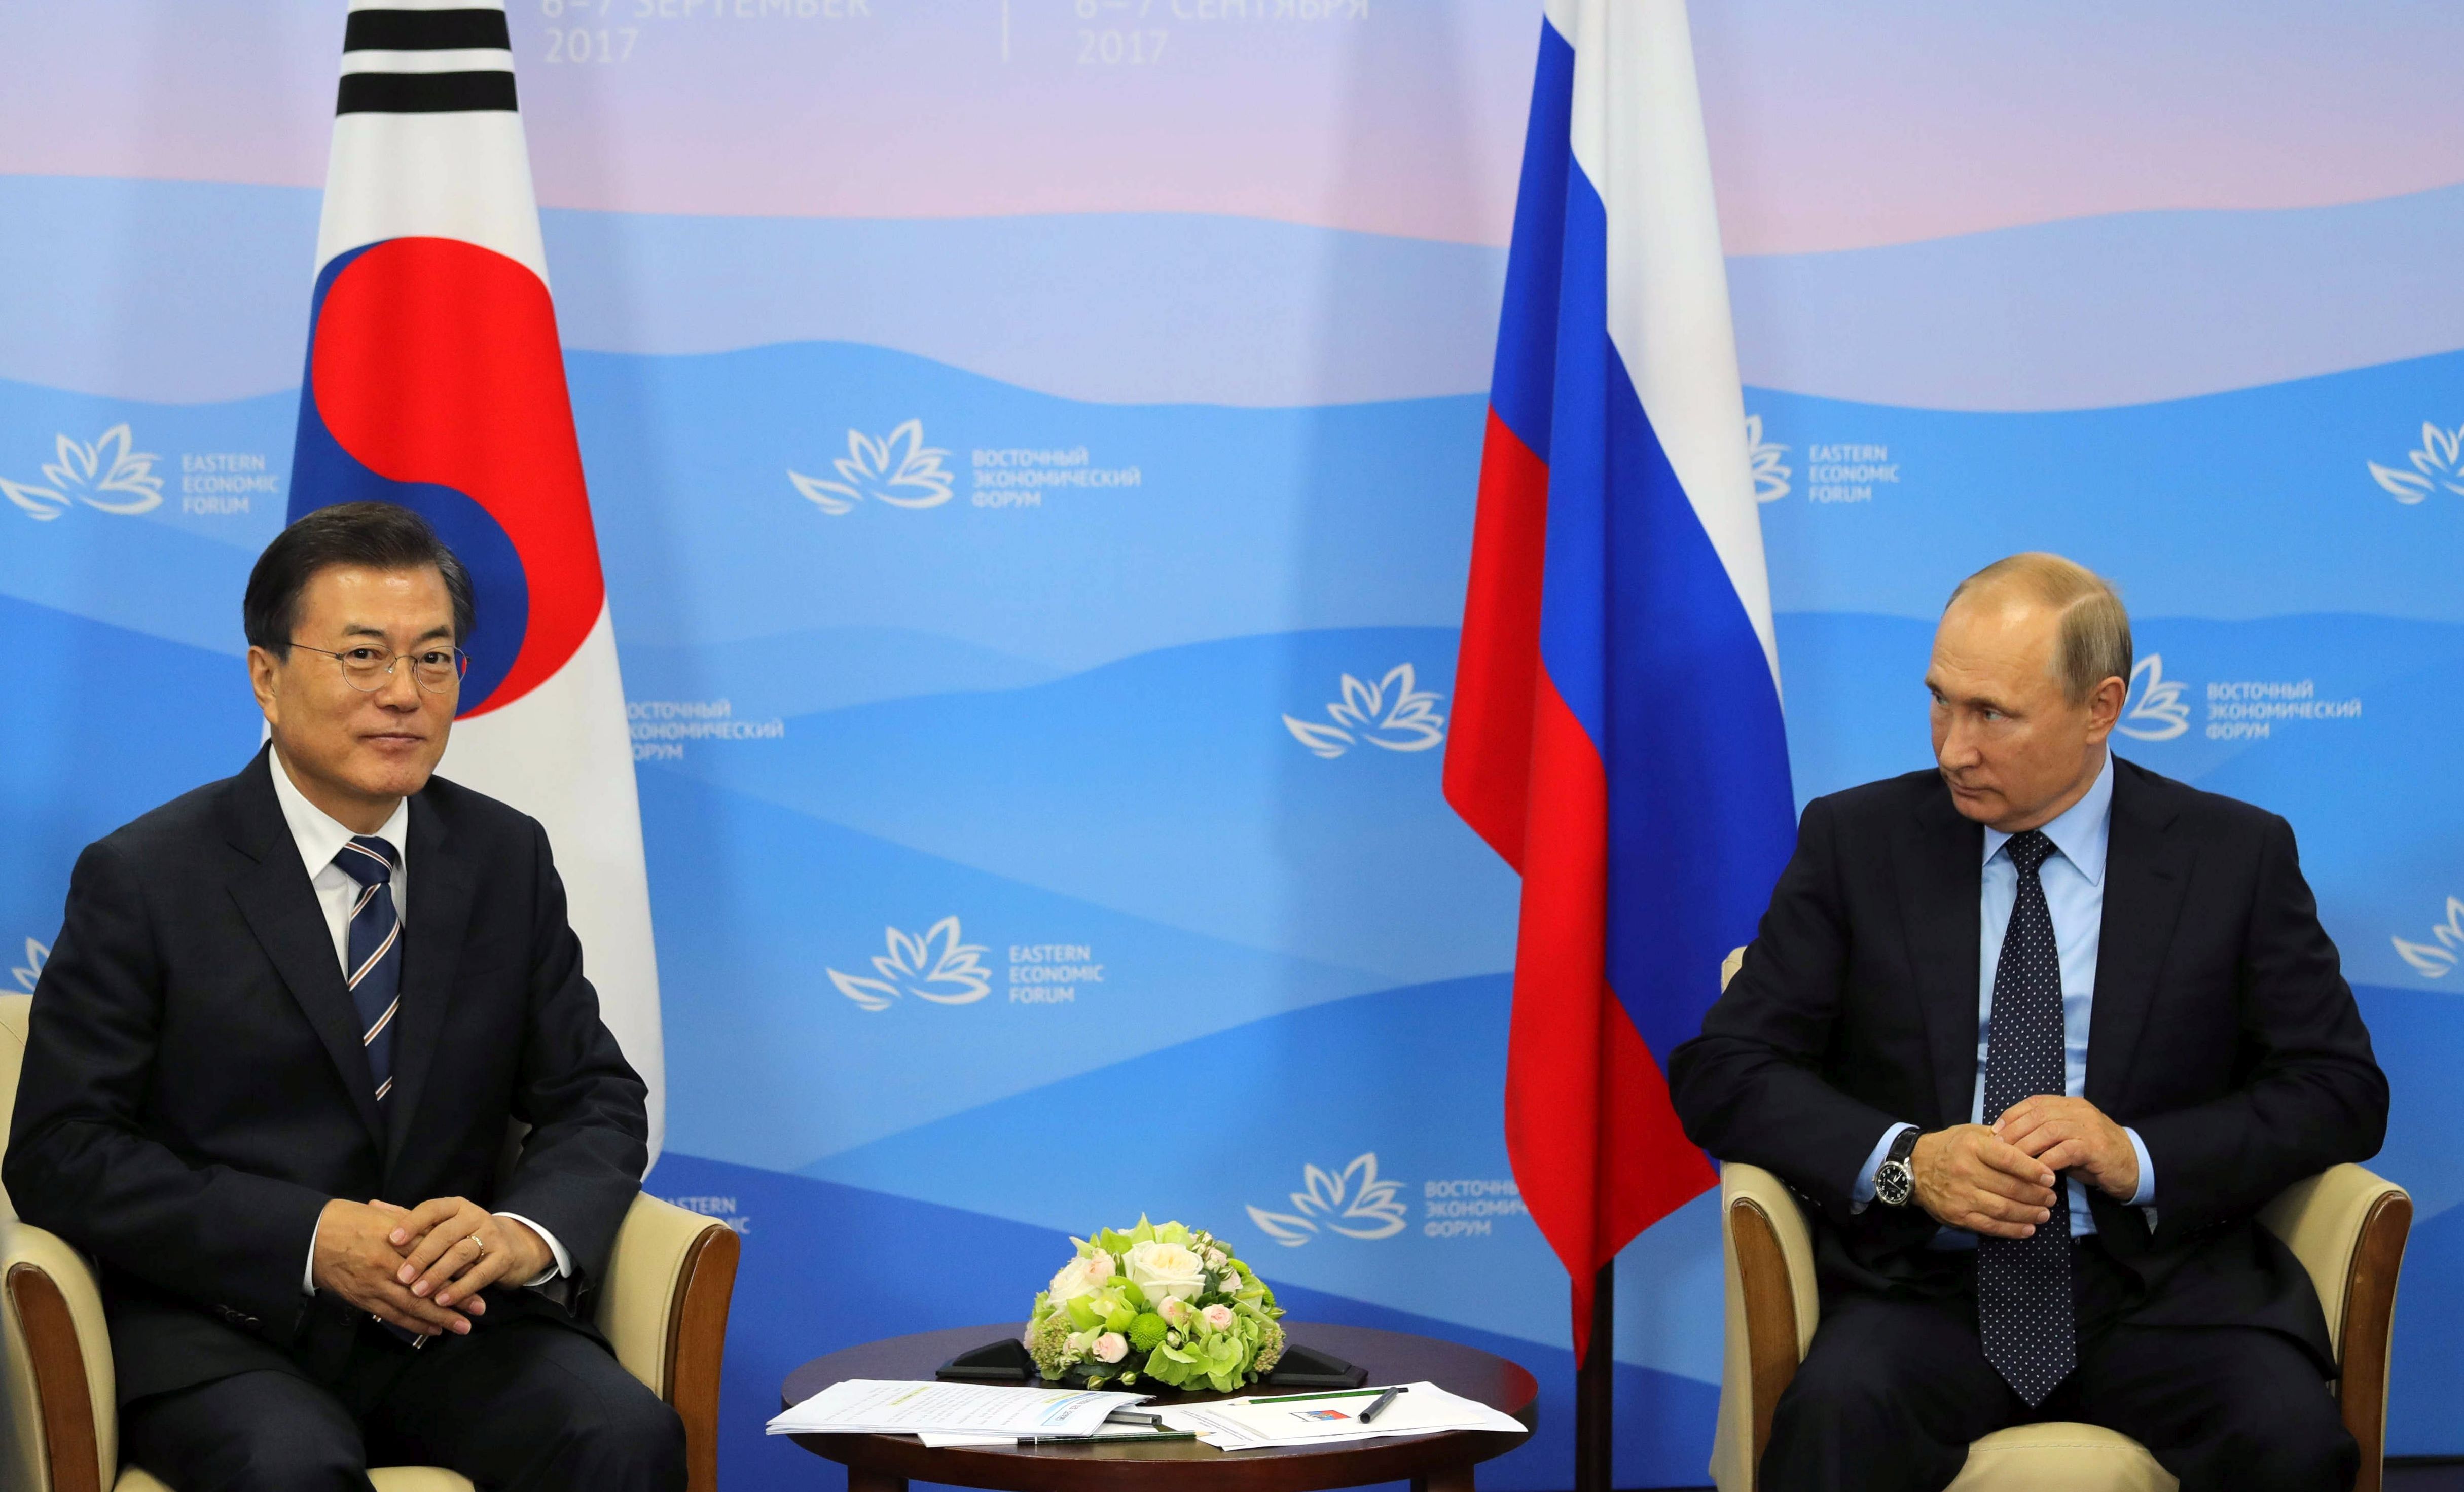 epa06187003 South Korean President Moon Jae-in (L) holds summit talks with Russian President Vladimir Putin (R) in Vladivostok, Russia, 06 September 2017. Moon is on the first day of his two-day visit to the Russian city to attend a regional forum.  EPA/MIKHAIL KLIMENTYEV / SPUTNIK/ KREMLIN / POOL MANDATORY CREDIT